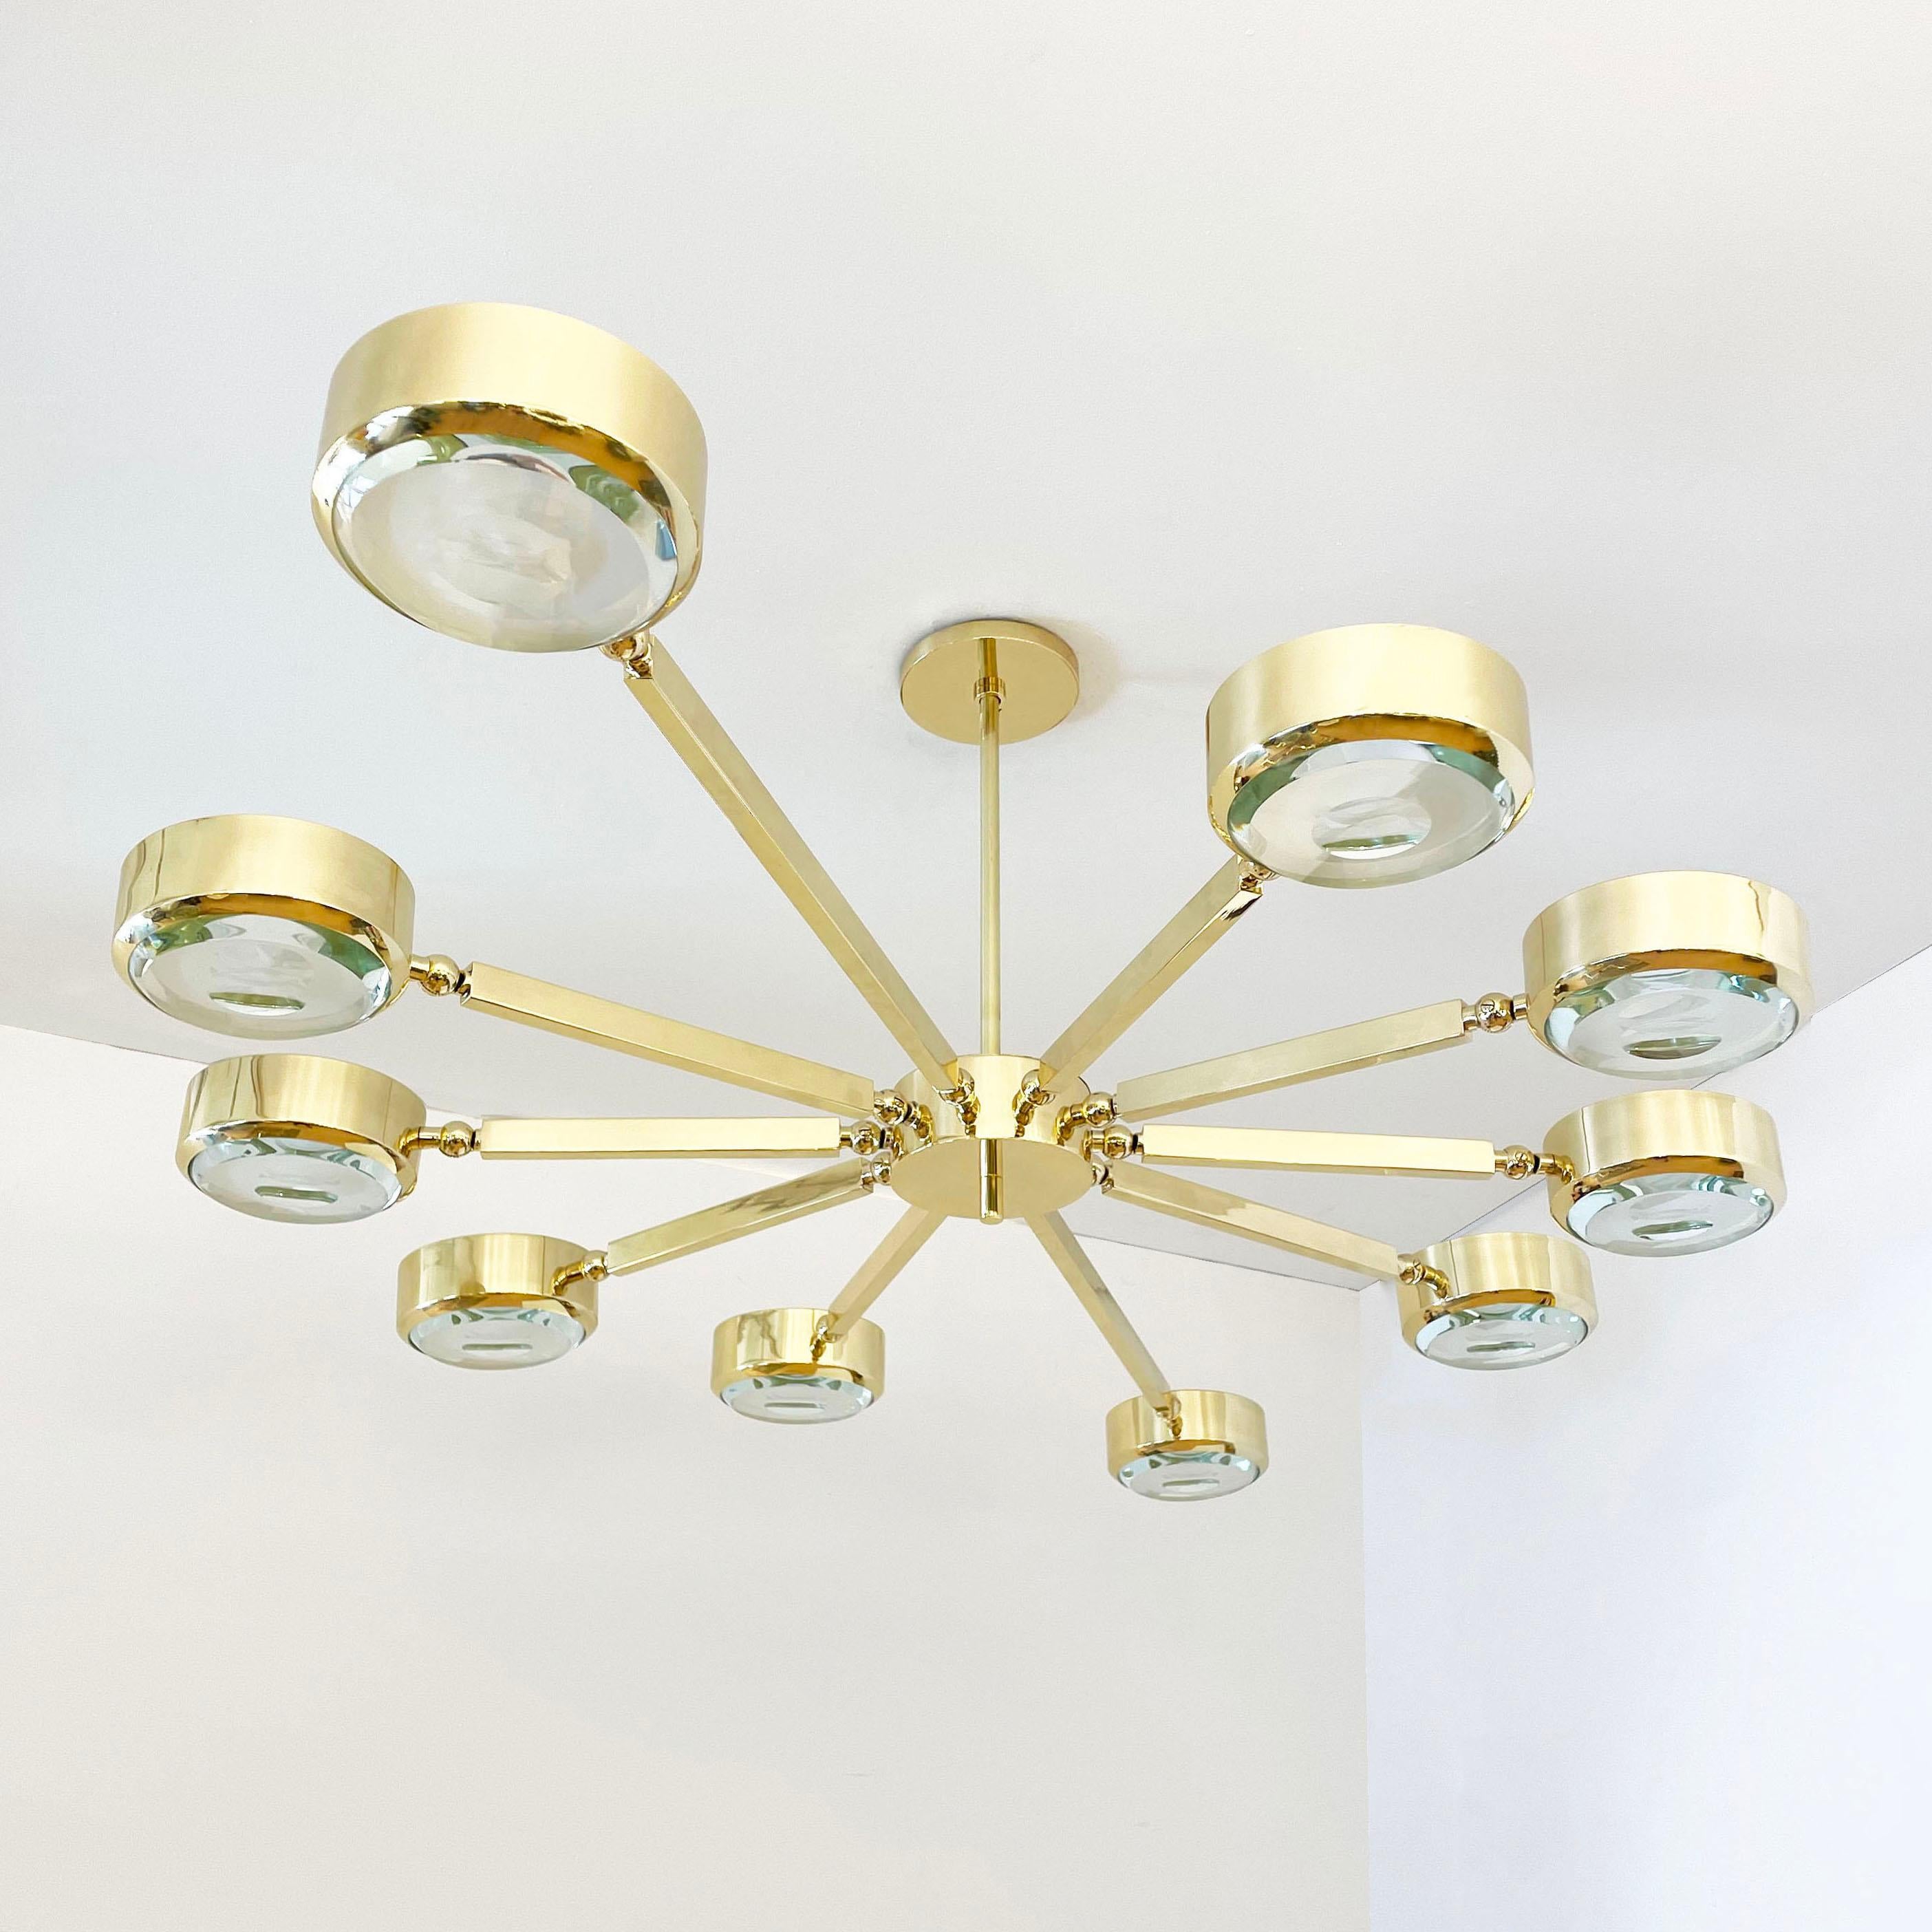 Contemporary Oculus Oval Ceiling Light by Gaspare Asaro- Bronze Finish with Carved Glass For Sale